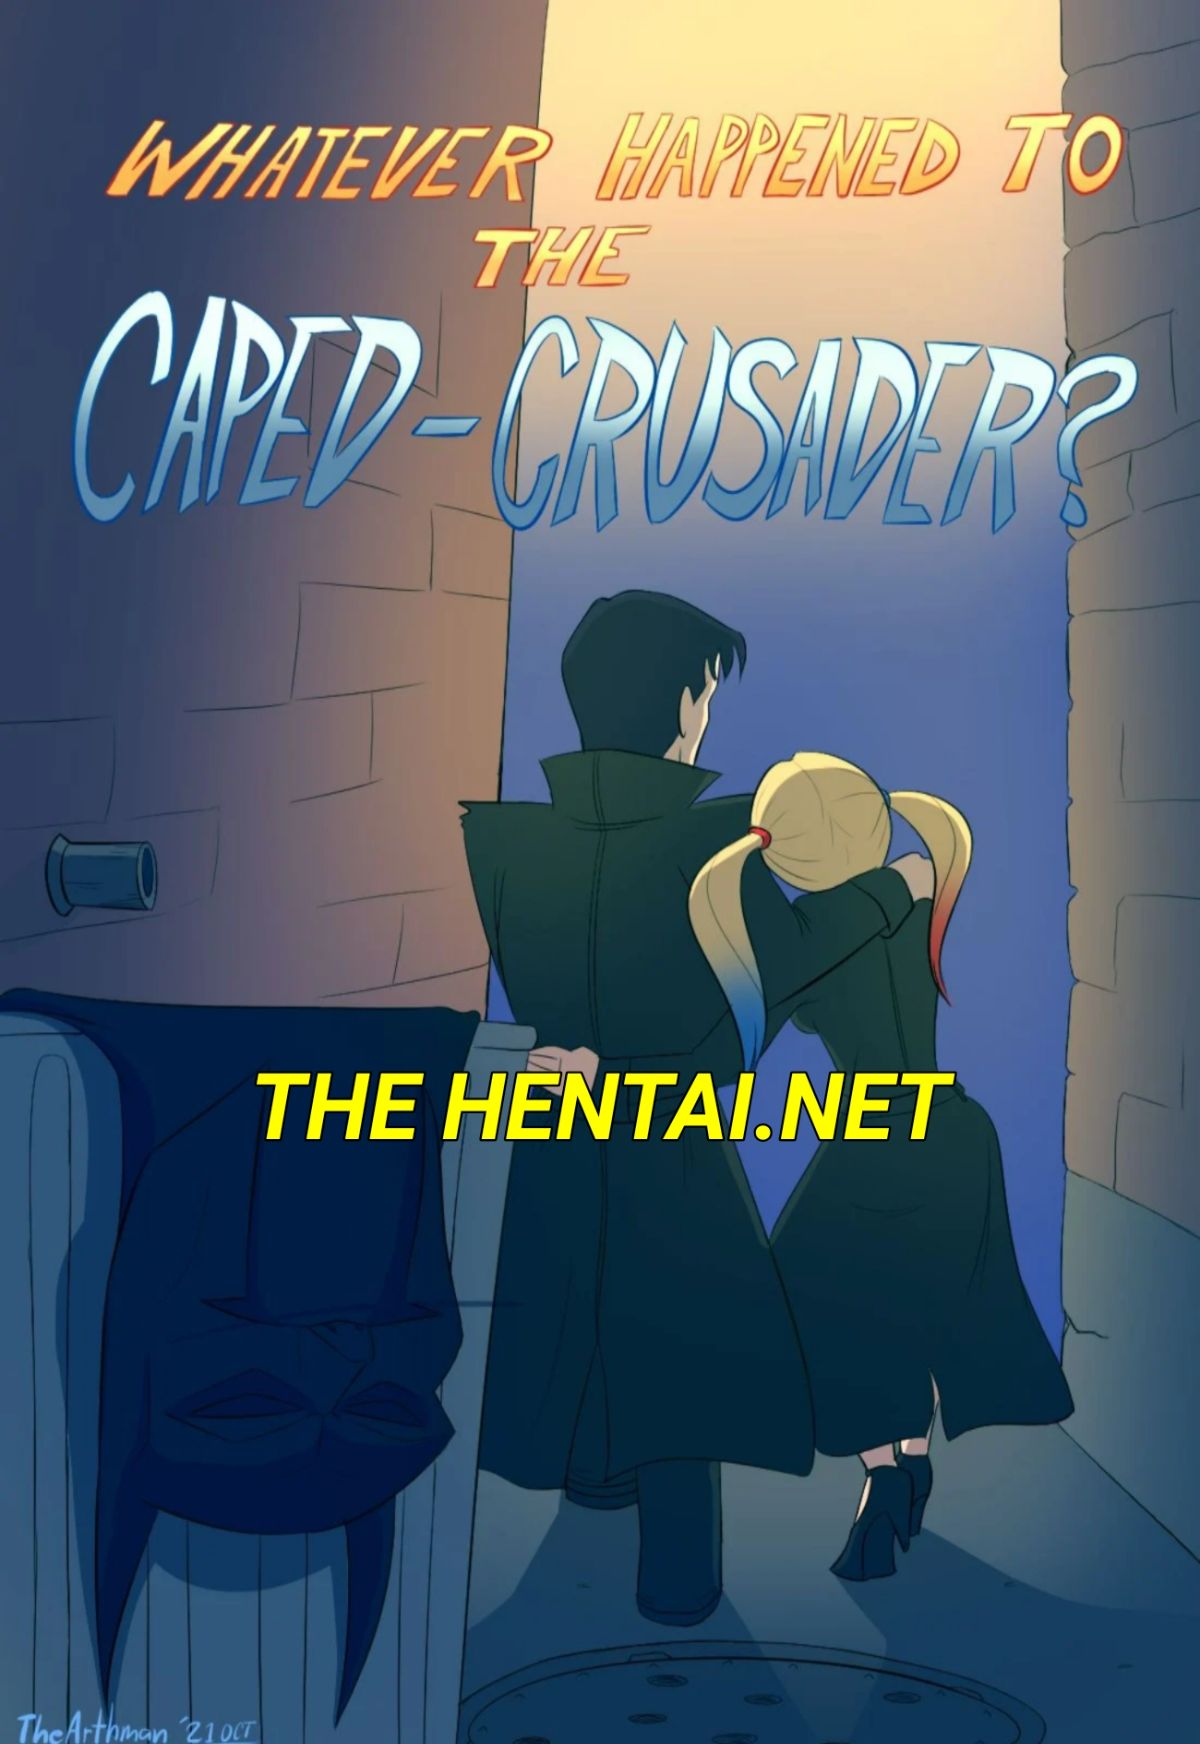 Whatever Happened To The Caped Crusader? Hentai pt-br 01